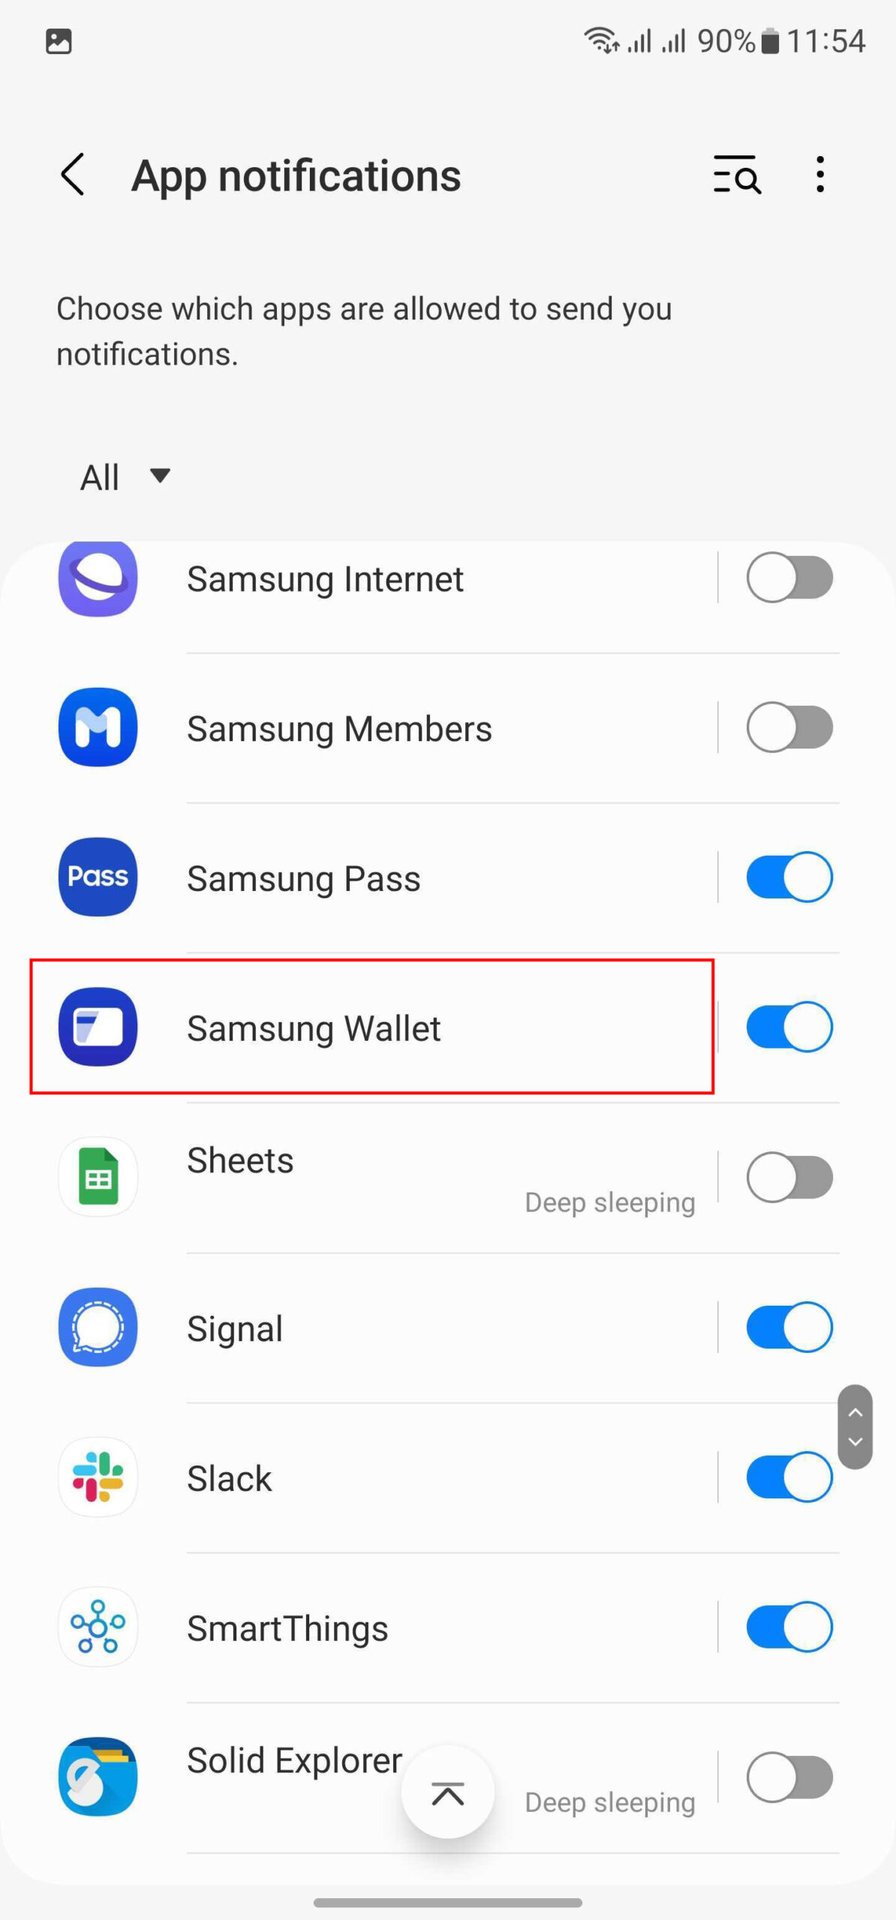 Disable Samsung Wallet deals and offers 3